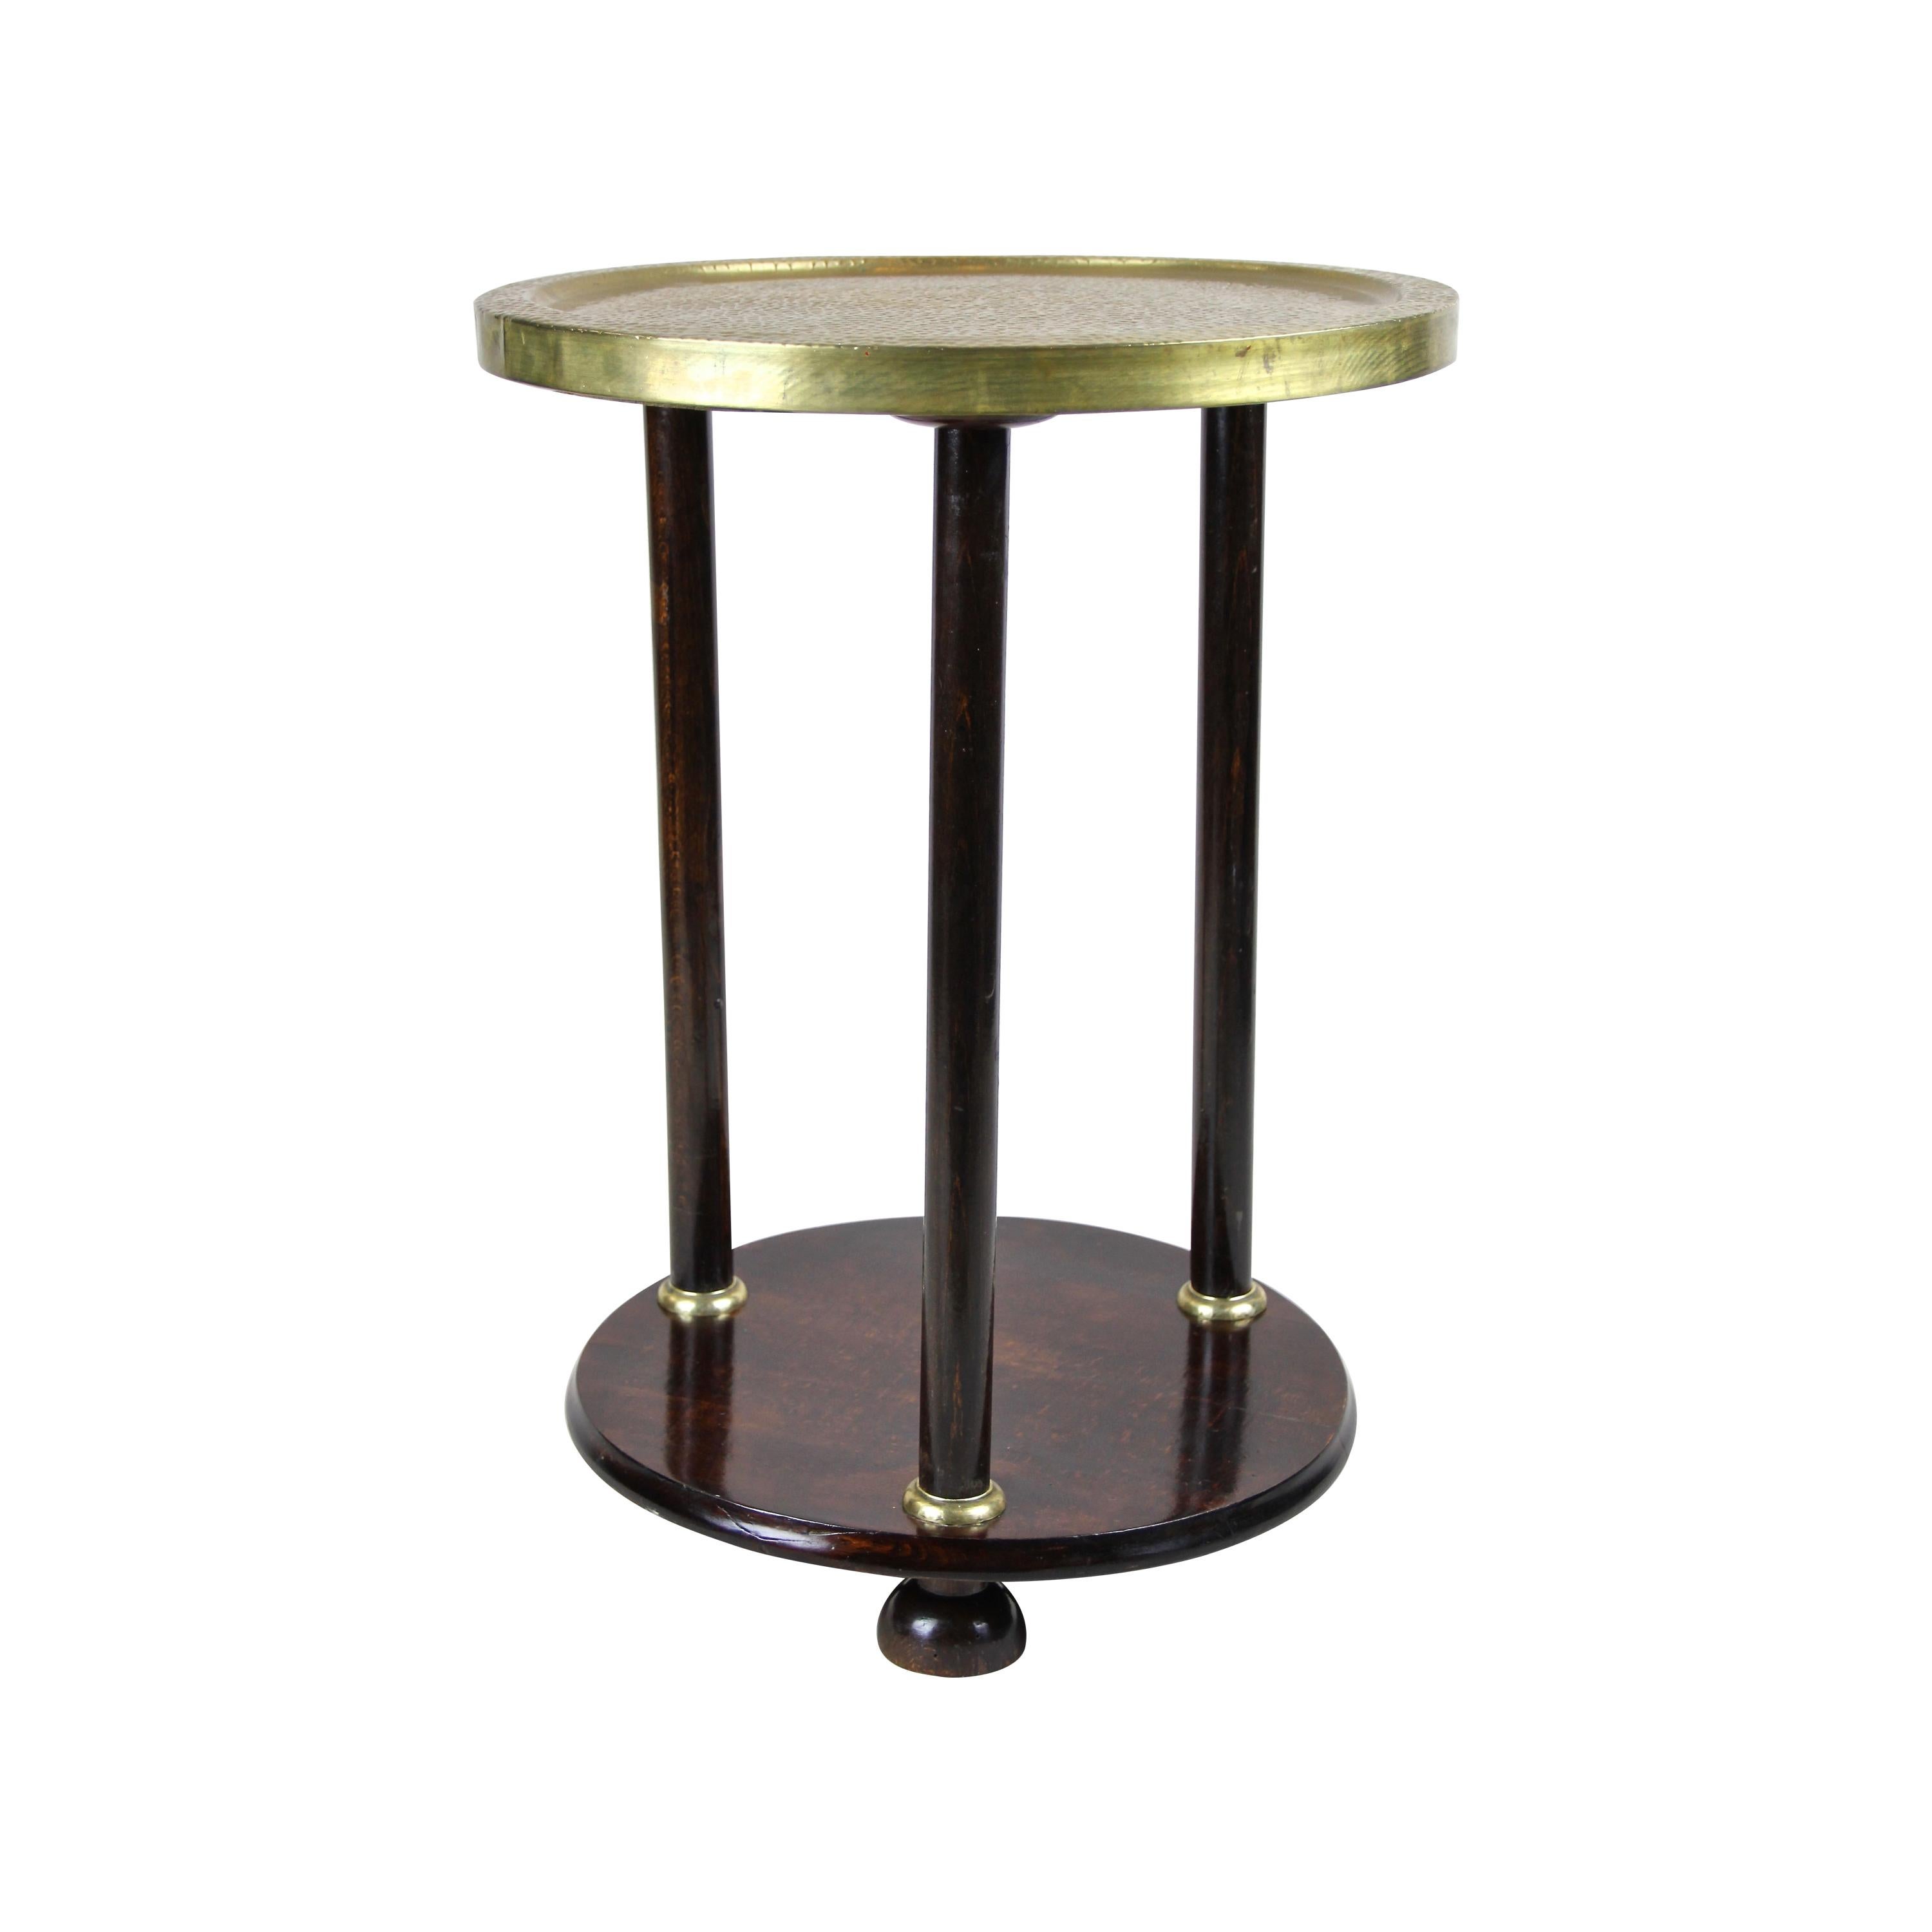 Gueridon Side Table with Brass Table Top Attributed to Kohn, Austria, circa 1910